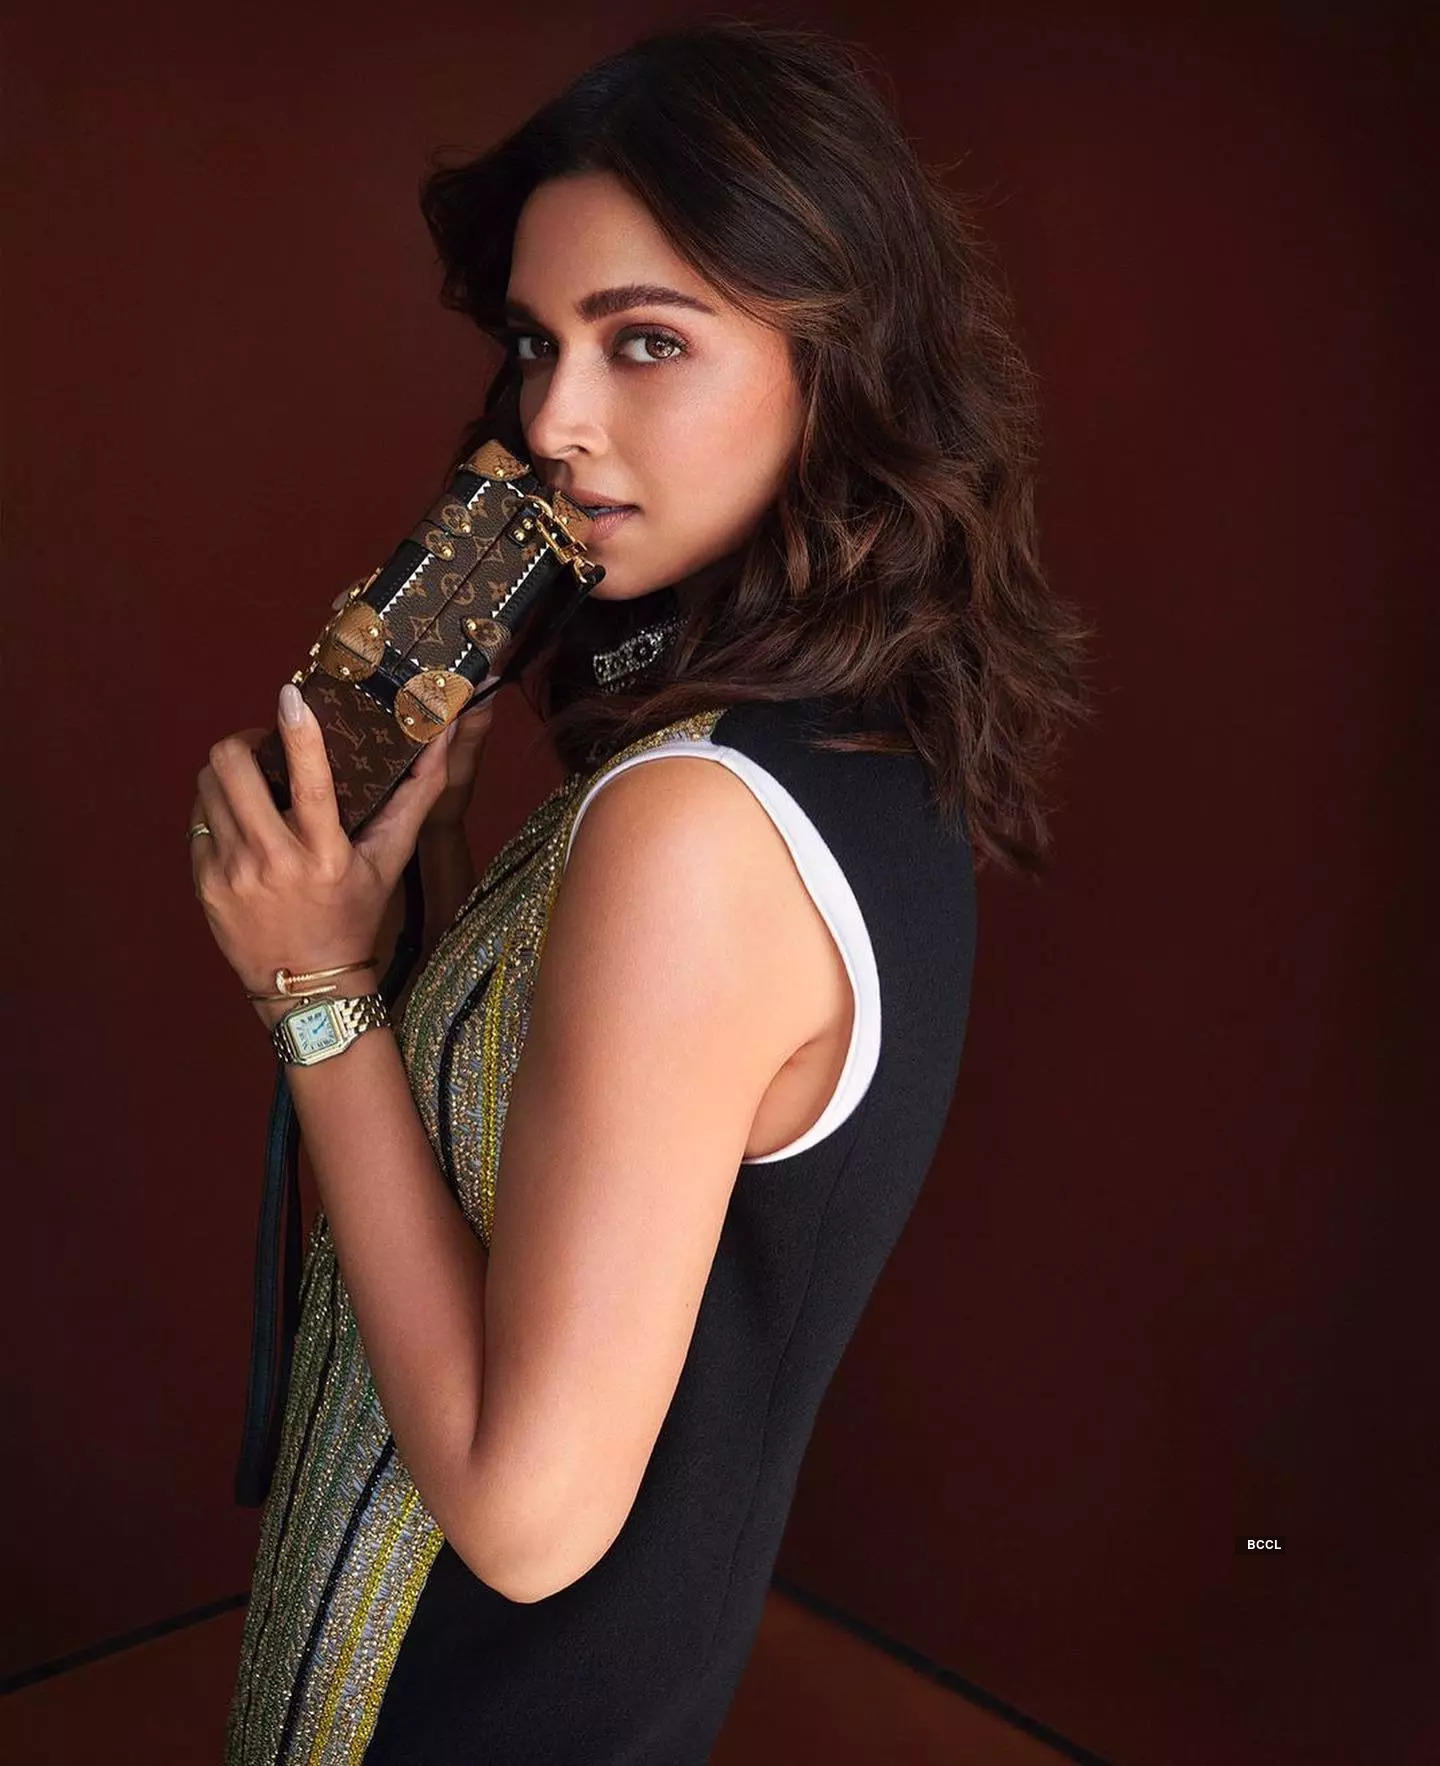 These glamorous pictures of Deepika Padukone are breaking the internet